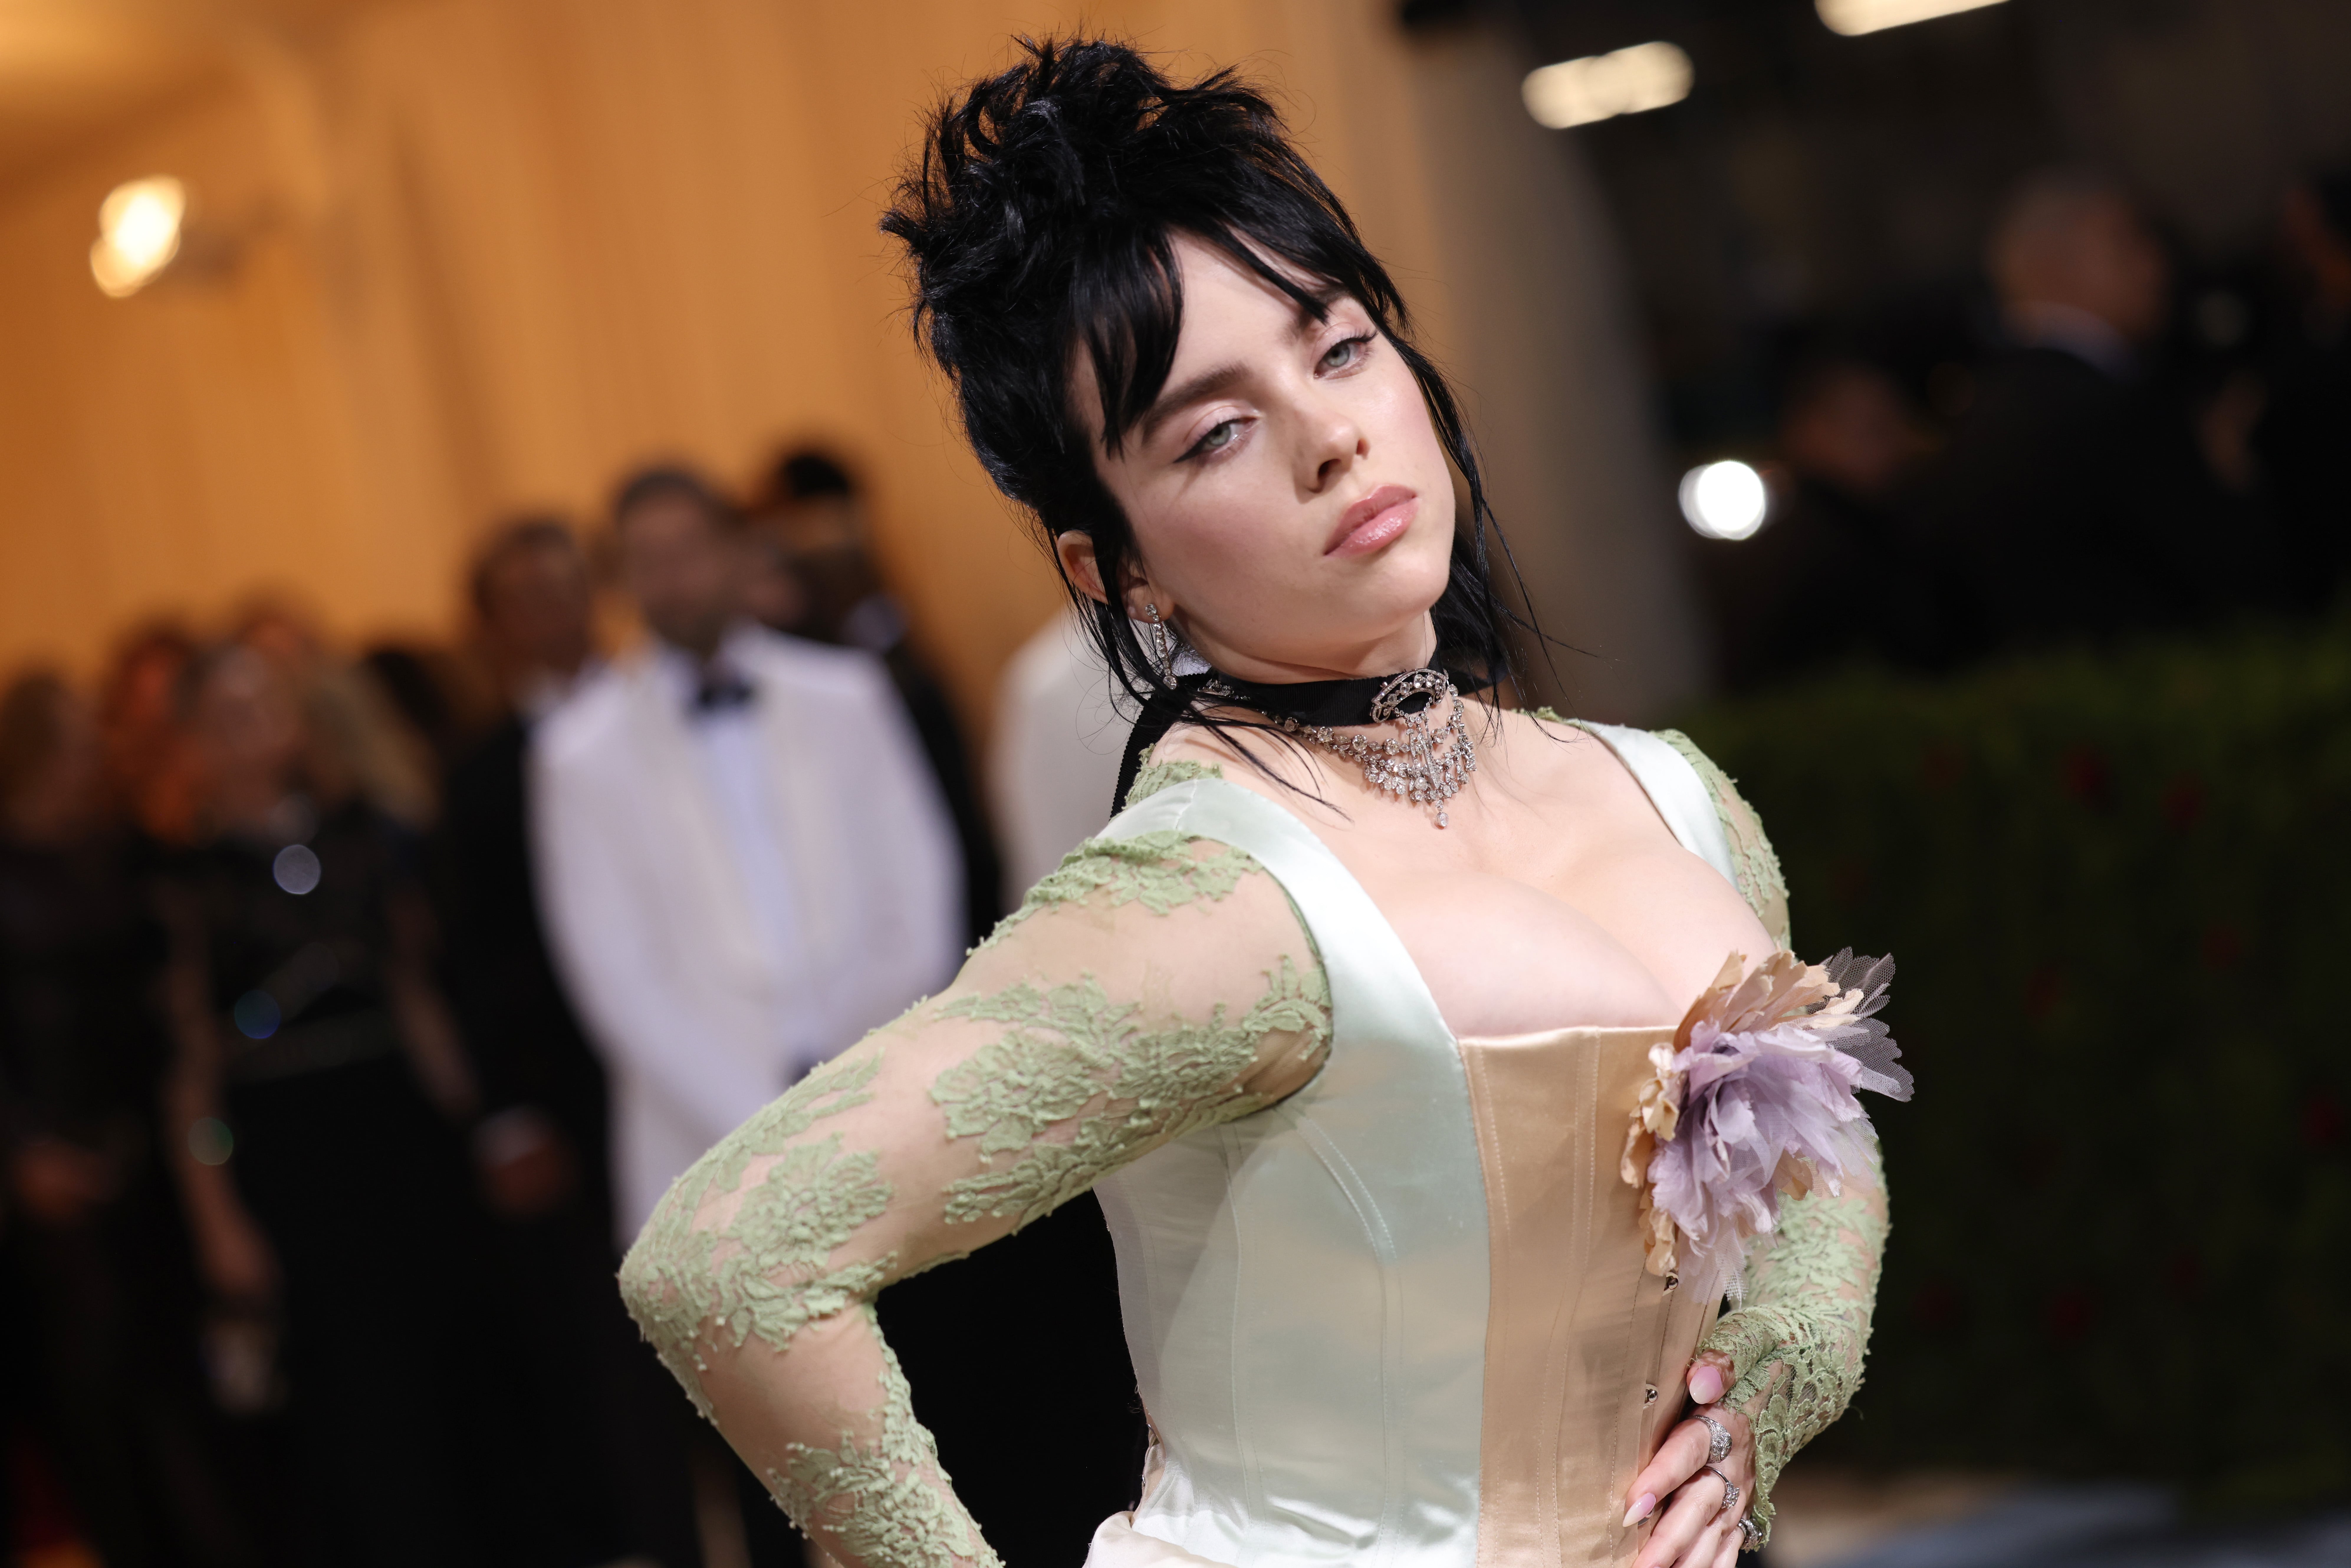 Met Gala 2022: Celebs Took the 'Gilded Glamour' Theme Literally